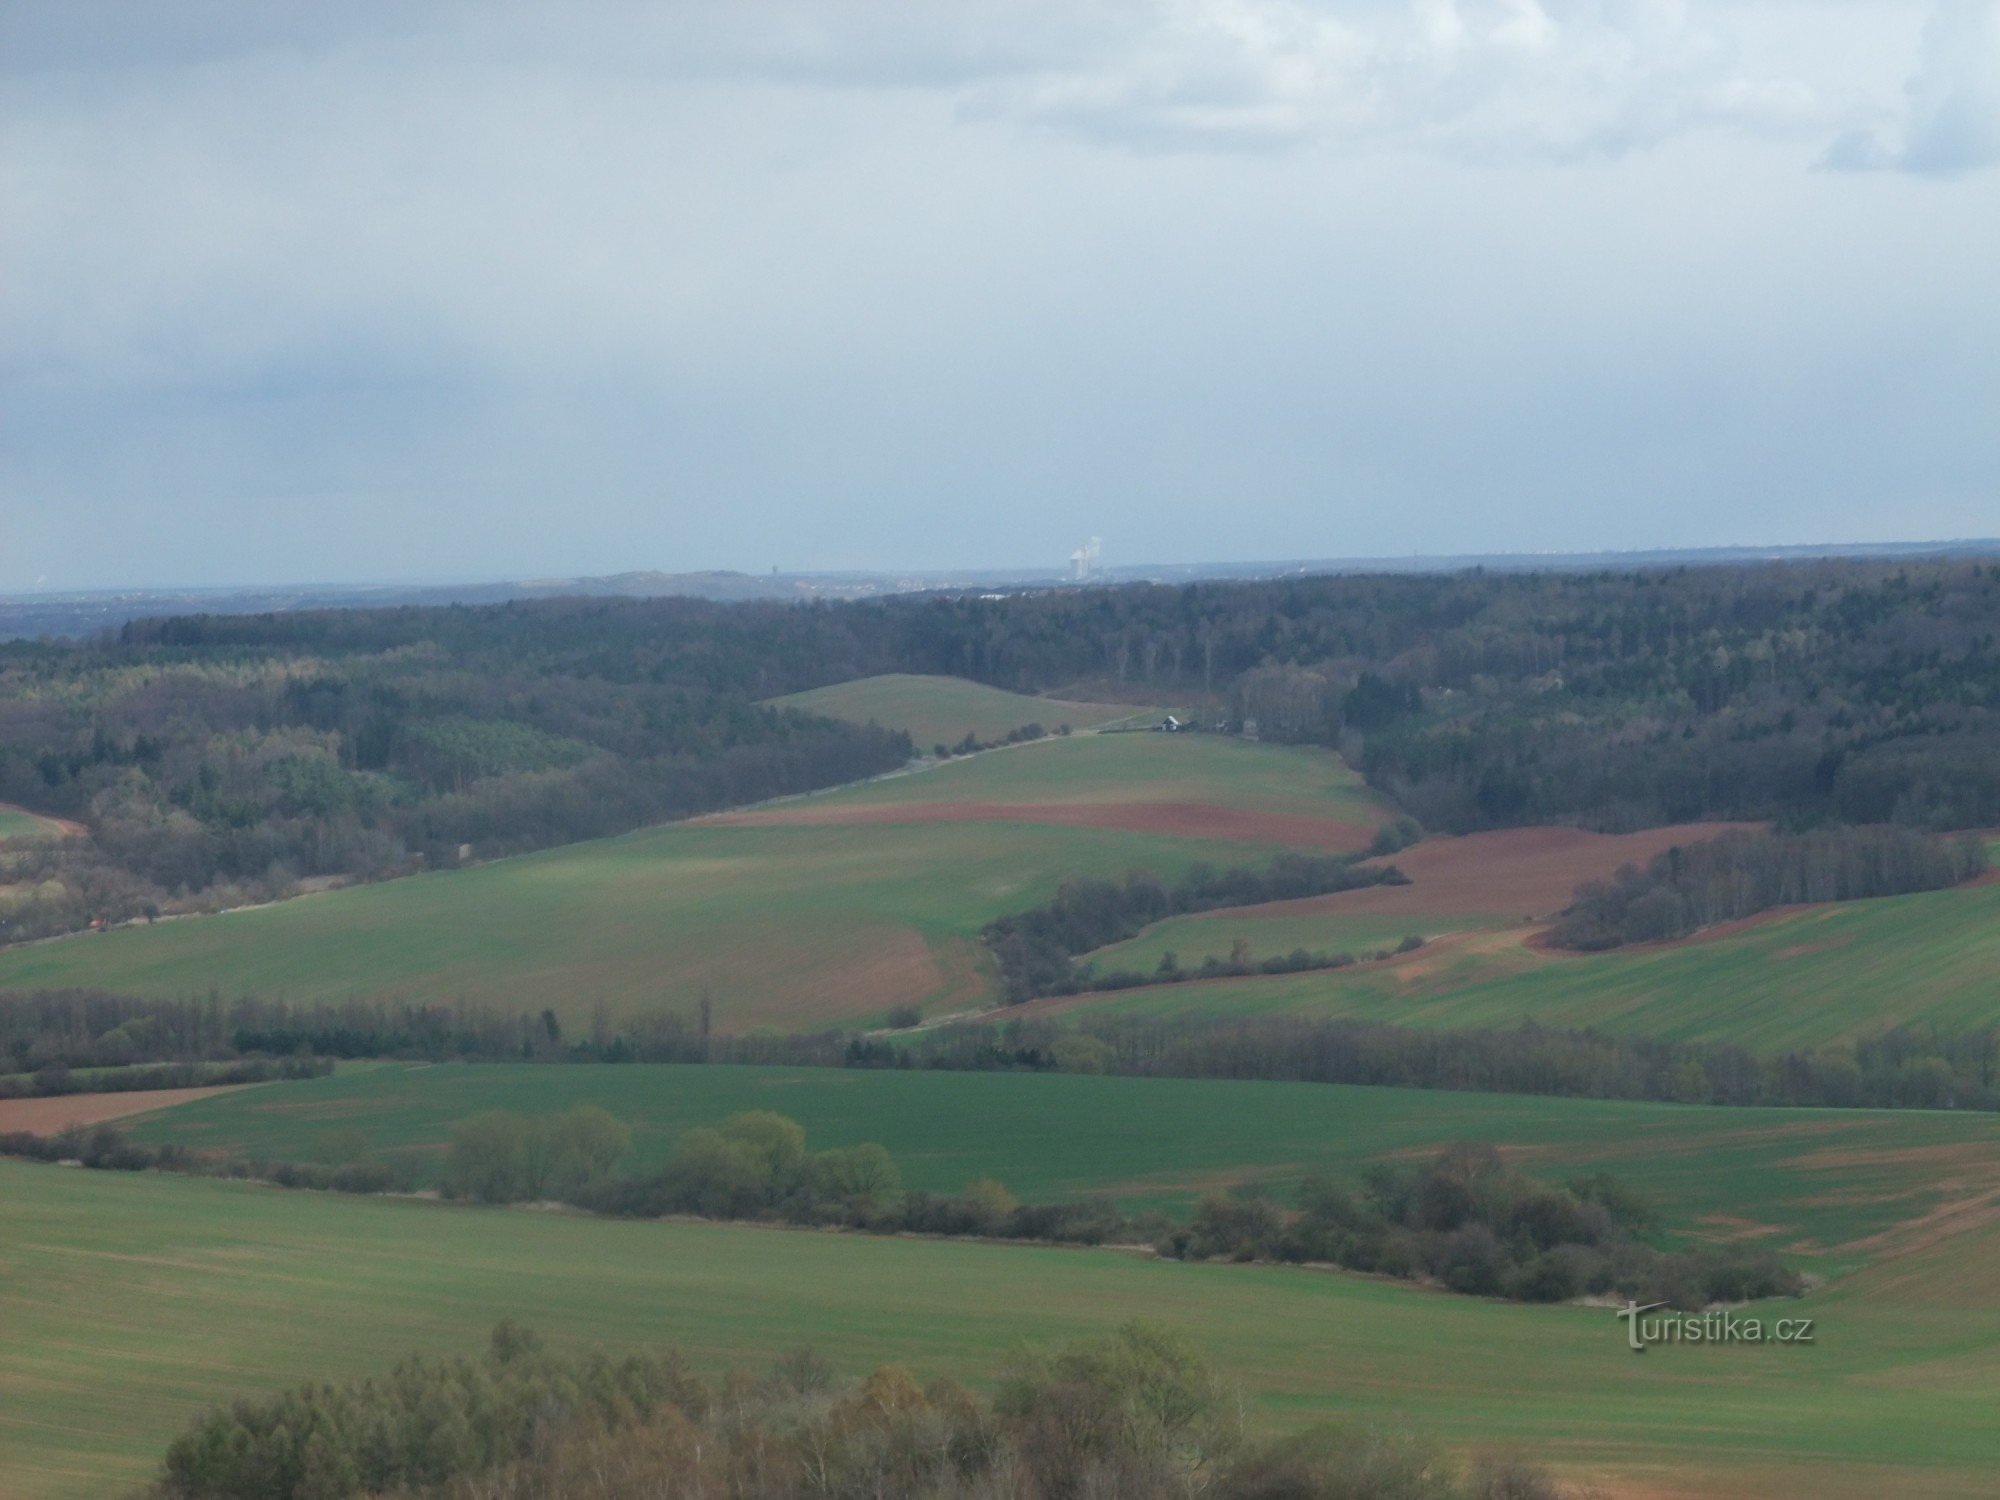 View from the Líský observation tower in a southerly direction